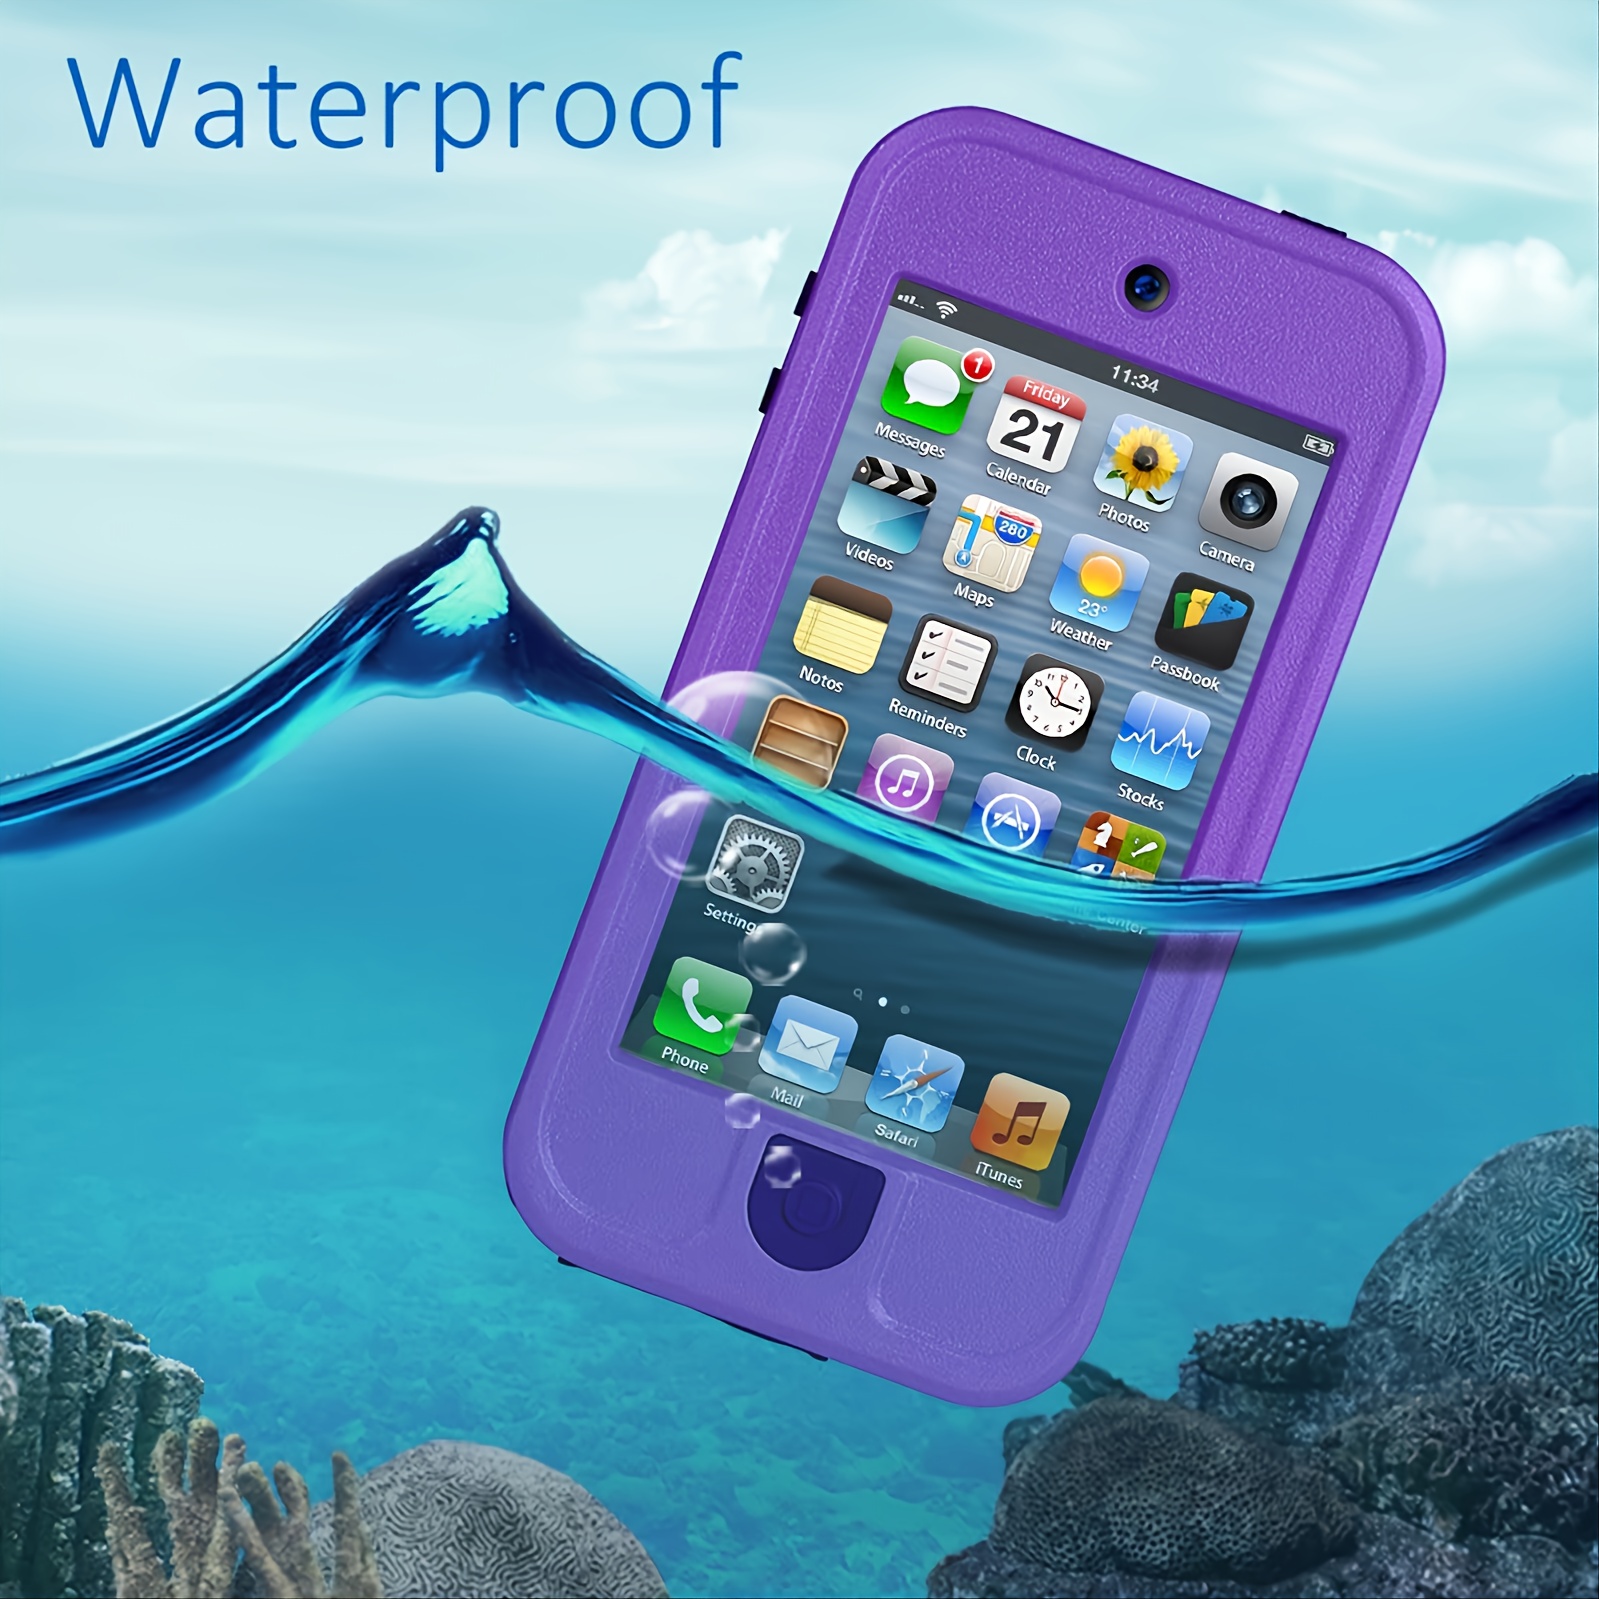 ipod touch 5th generation waterproof cases